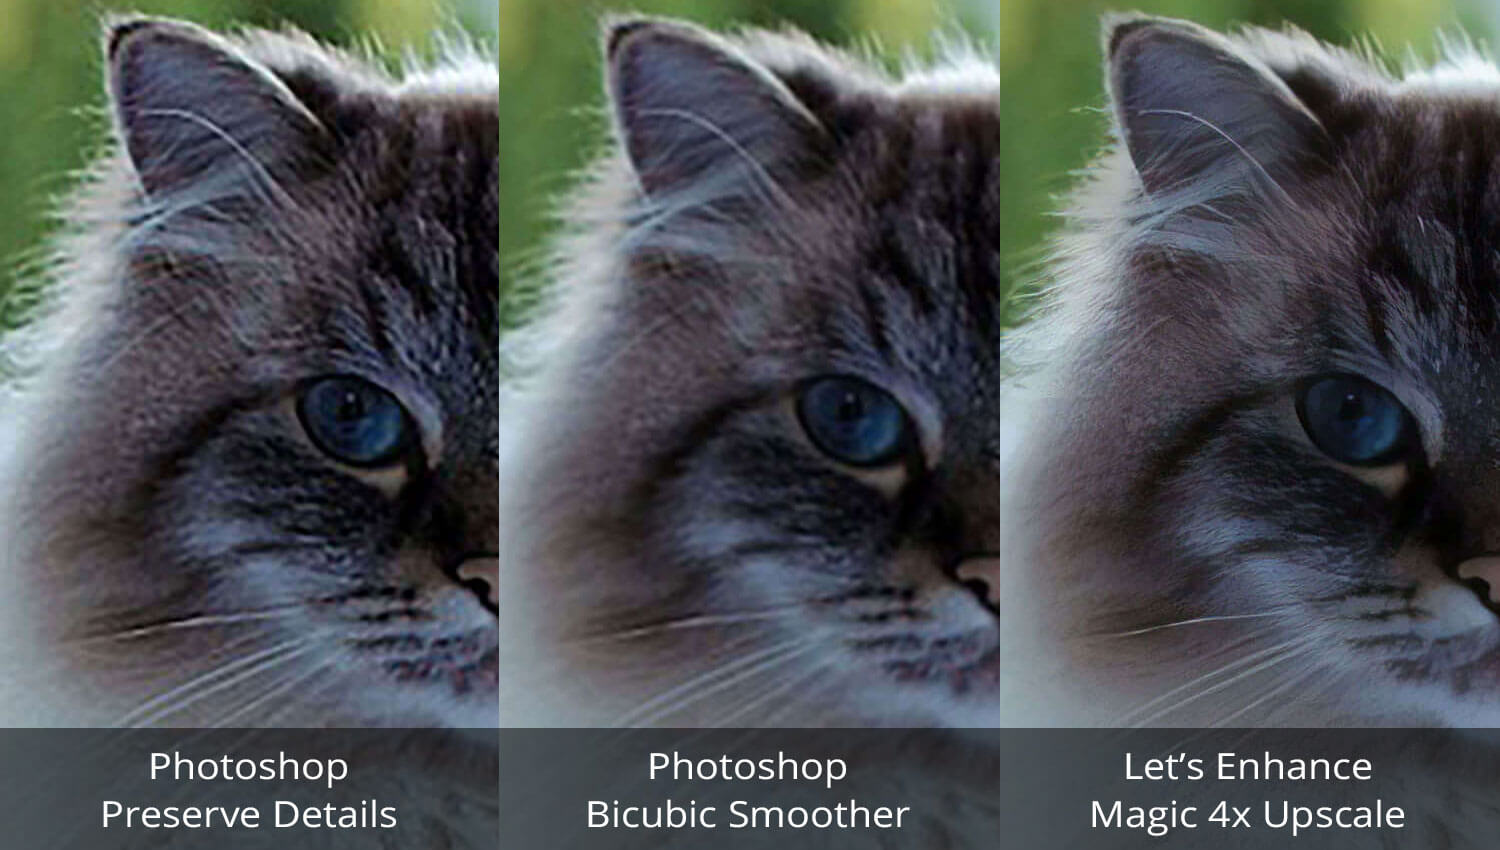 cat-side-by-side-comparison-1500x850